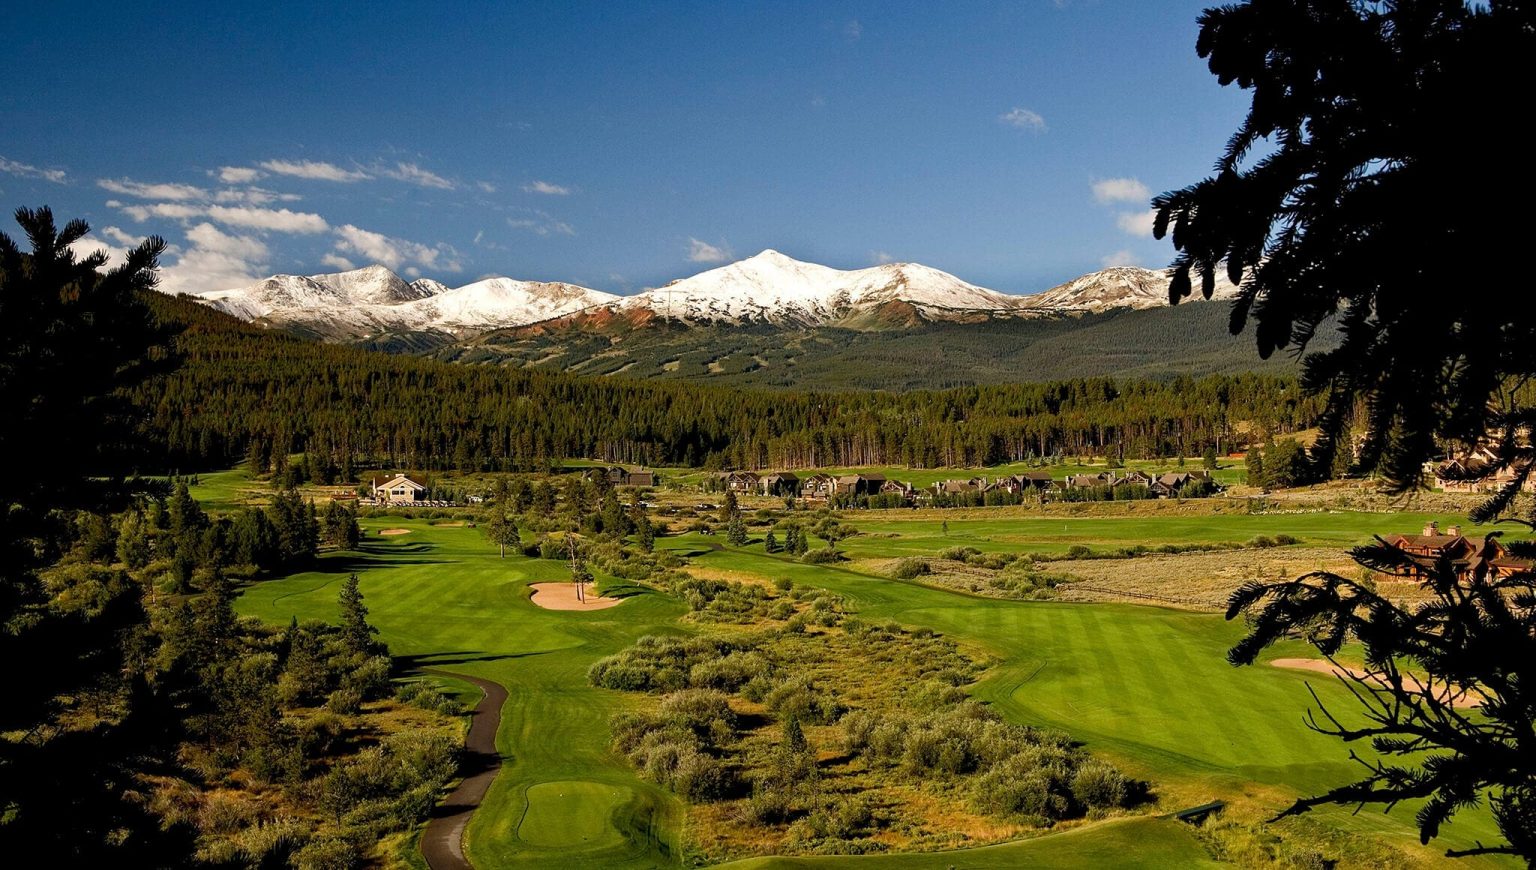 Overview of Breckenridge Jack Nicklaus Golf Club with mountains in background.